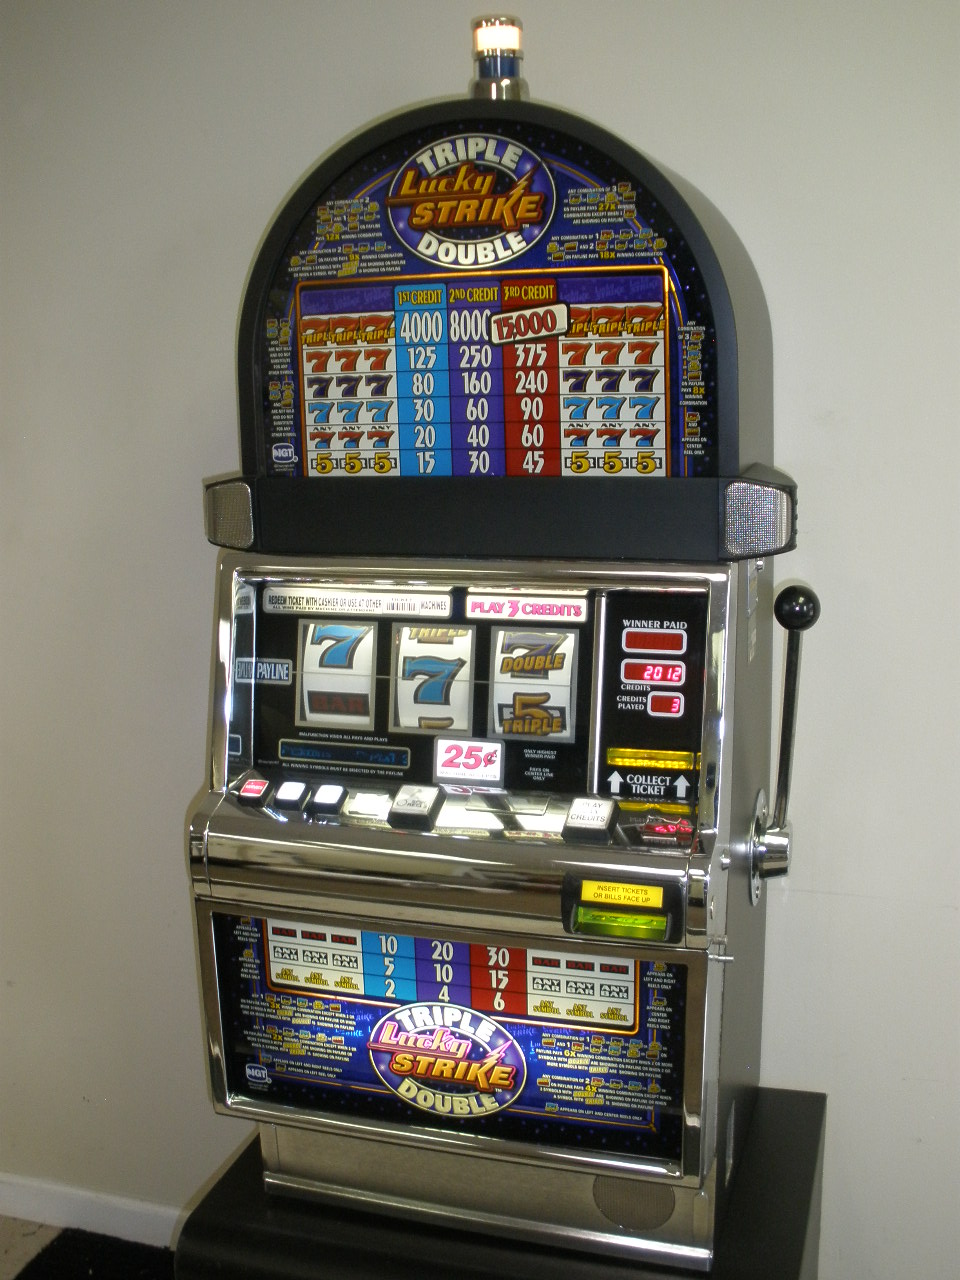 IGT TRIPLE DOUBLE LUCKY STRIKE S2000 SLOT MACHINE For Sale • Gambler's